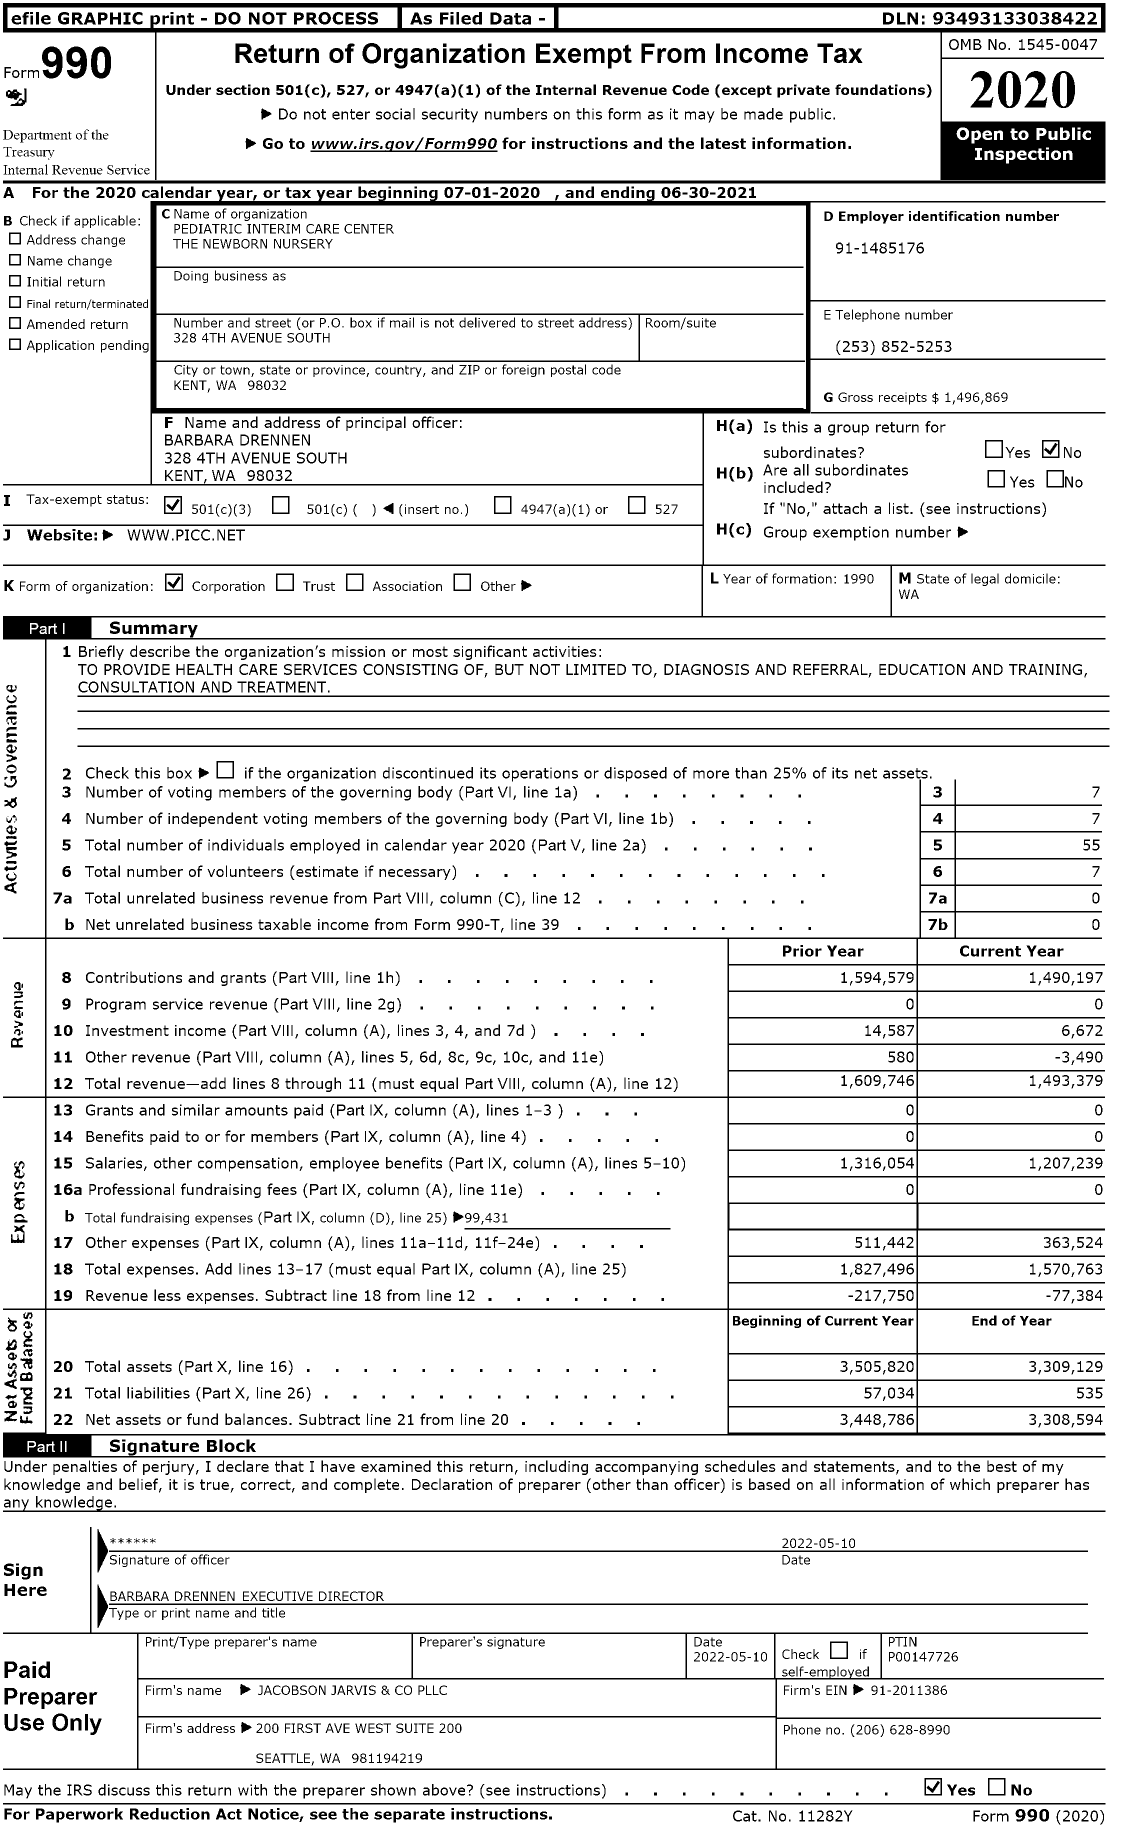 Image of first page of 2020 Form 990 for Pediatric Interim Care Center (PICC)